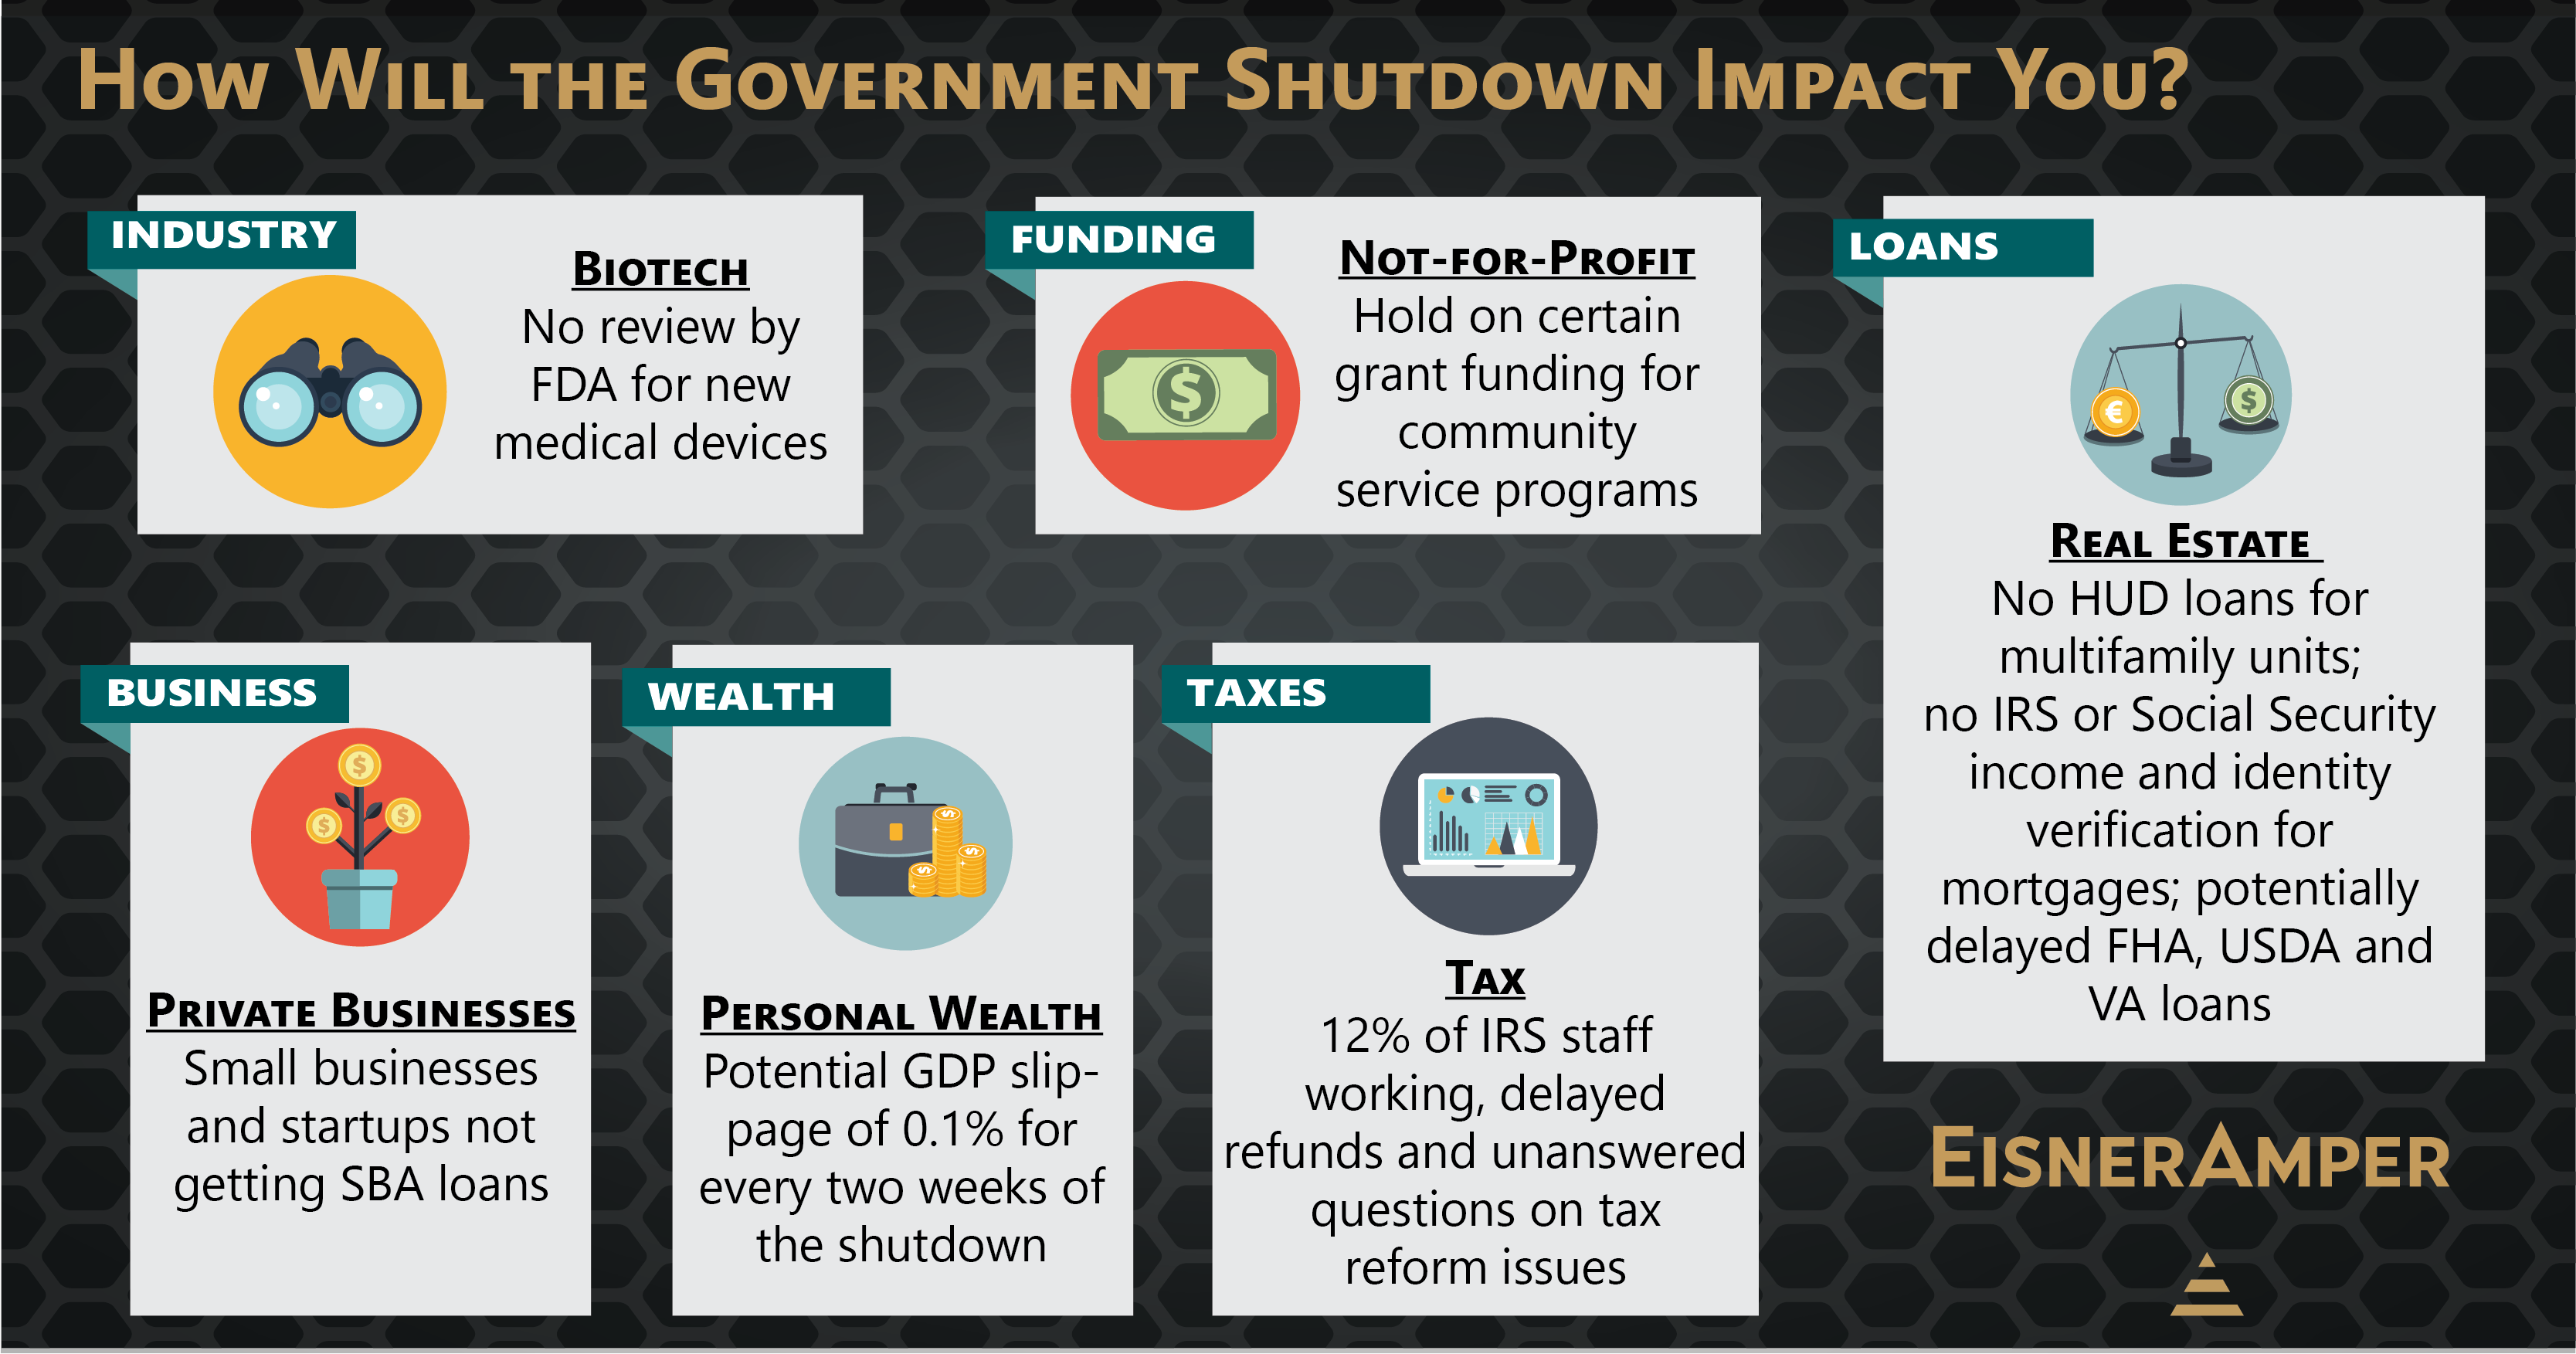 How will the government shutdown impact you